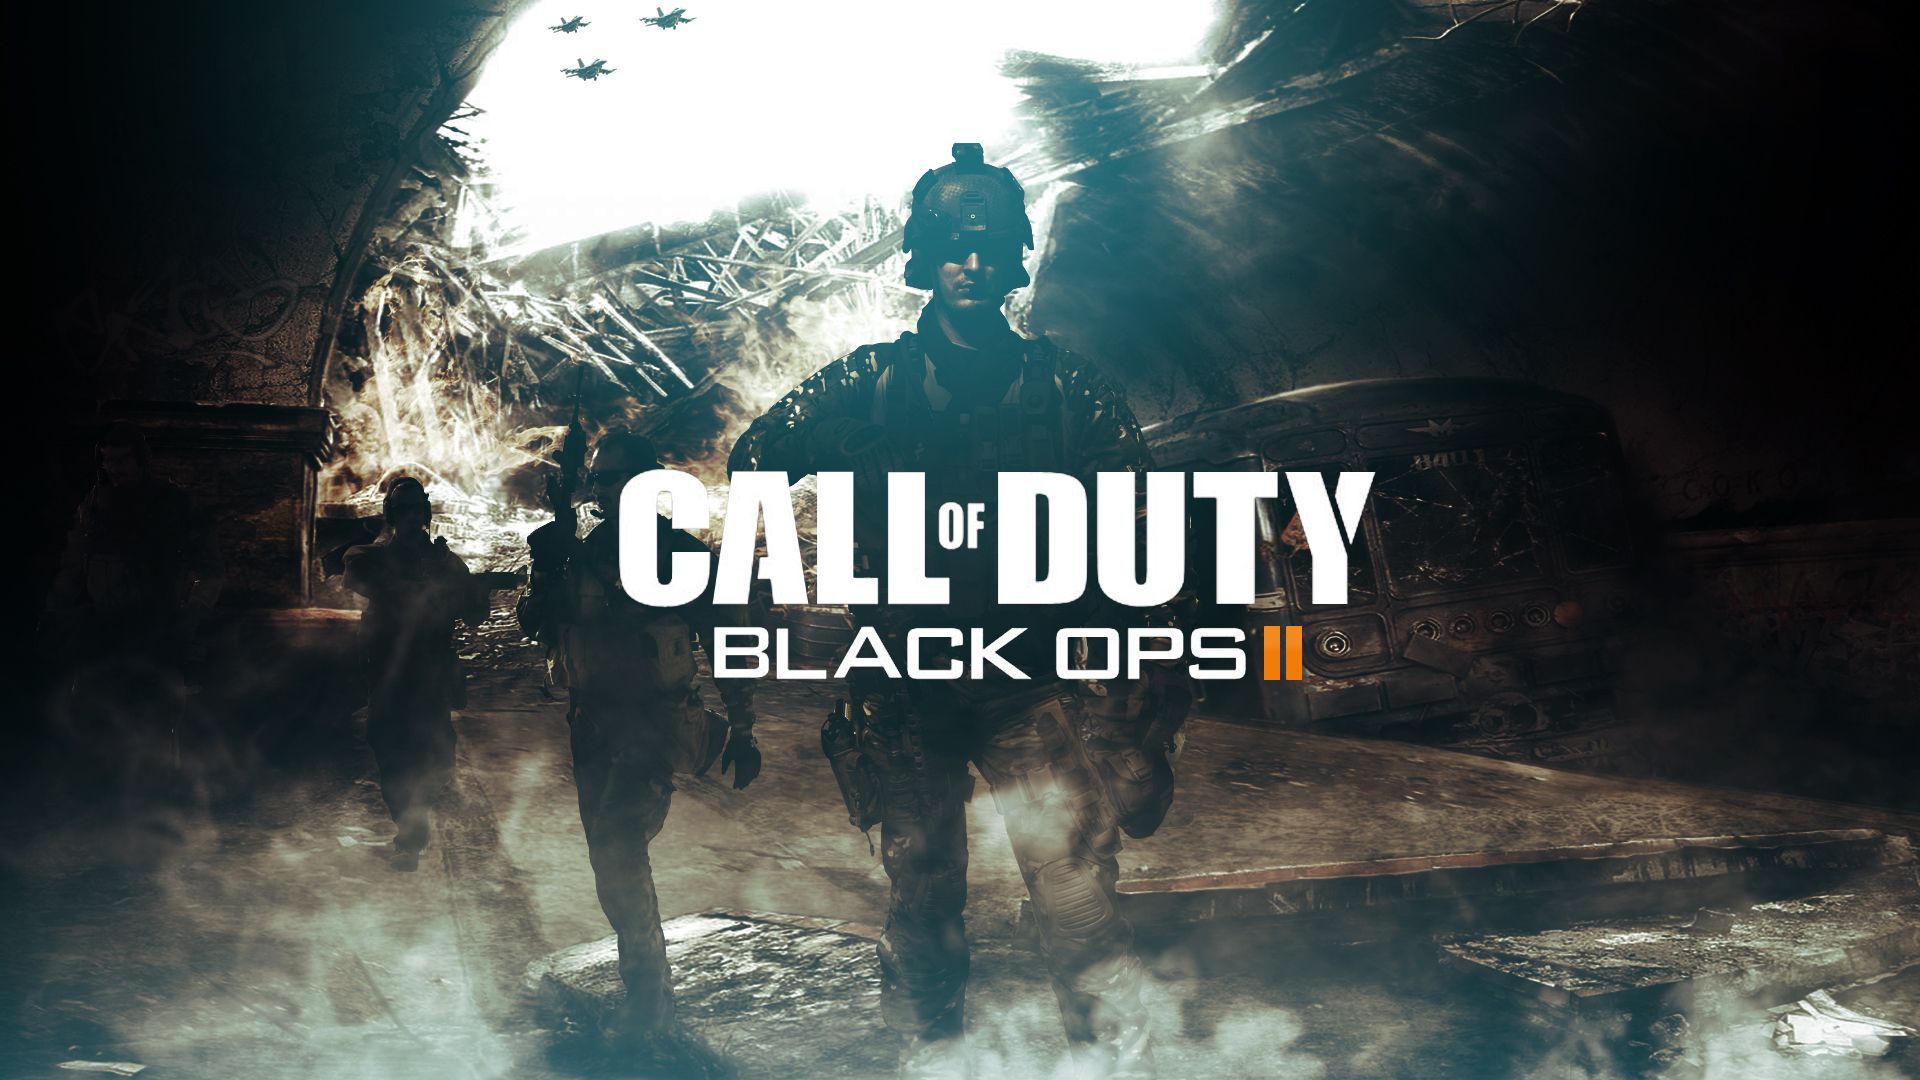 Ok, is there any chance that I can buy Call of duty: Black Ops 2